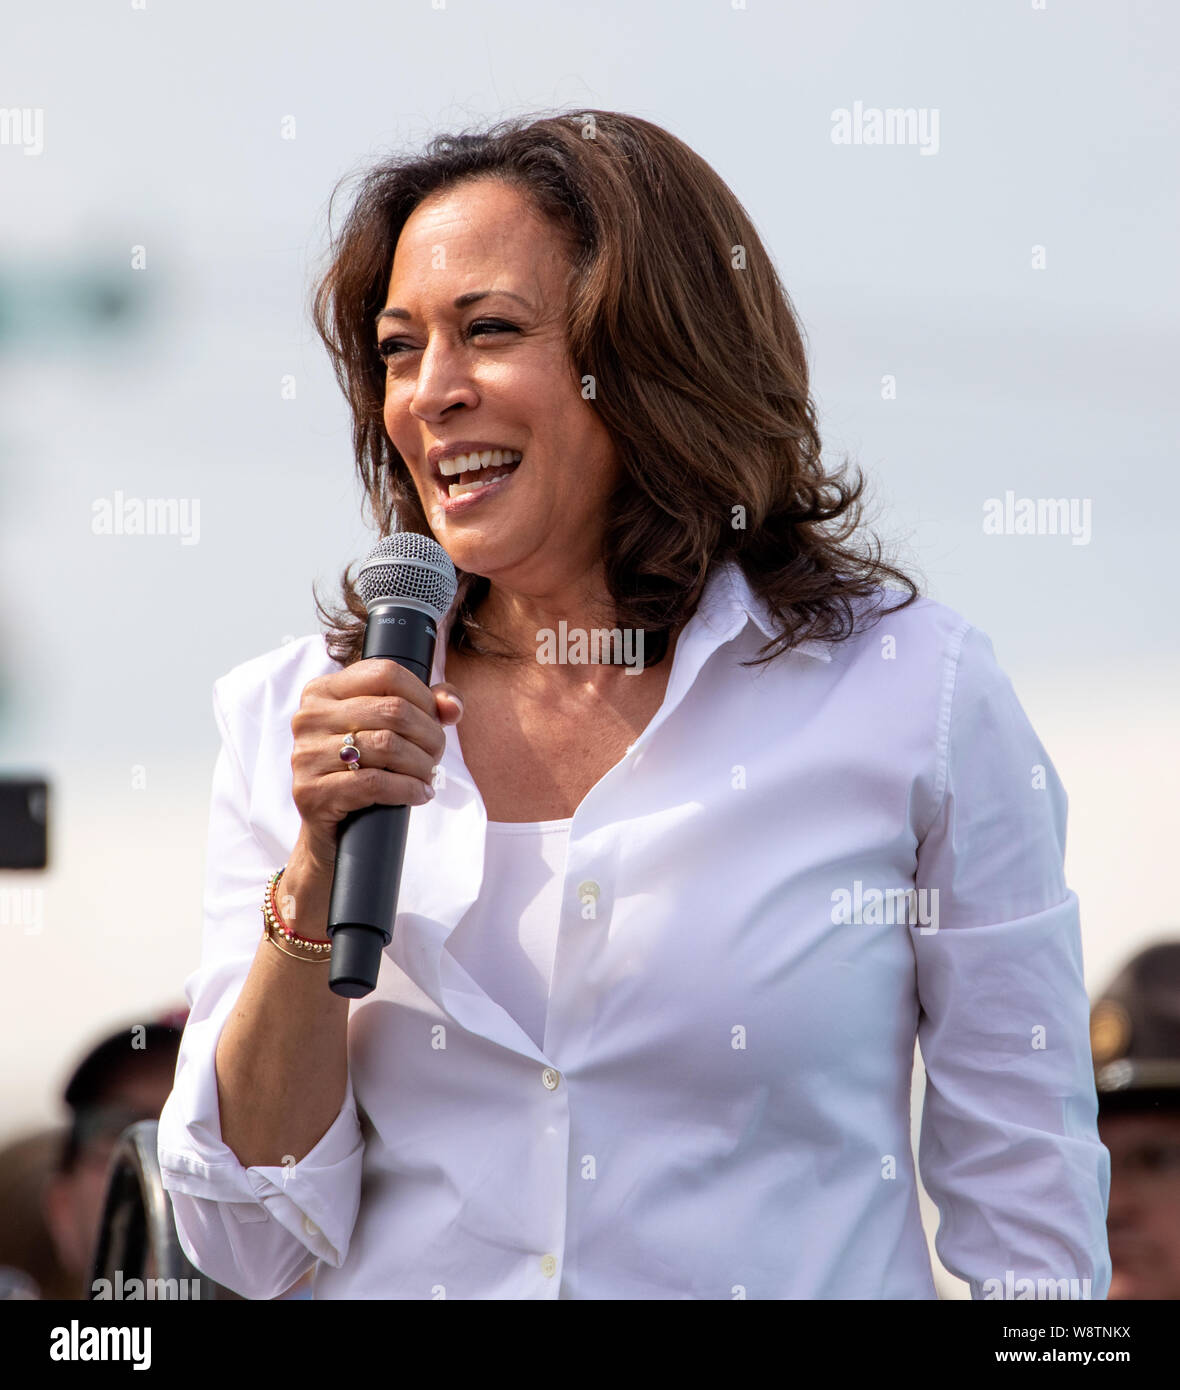 Des Moines, Iowa / USA - August 10, 2019: United States Senator and Democratic presidential candidate Kamala Harris greets supporters at the Iowa Stat Stock Photo